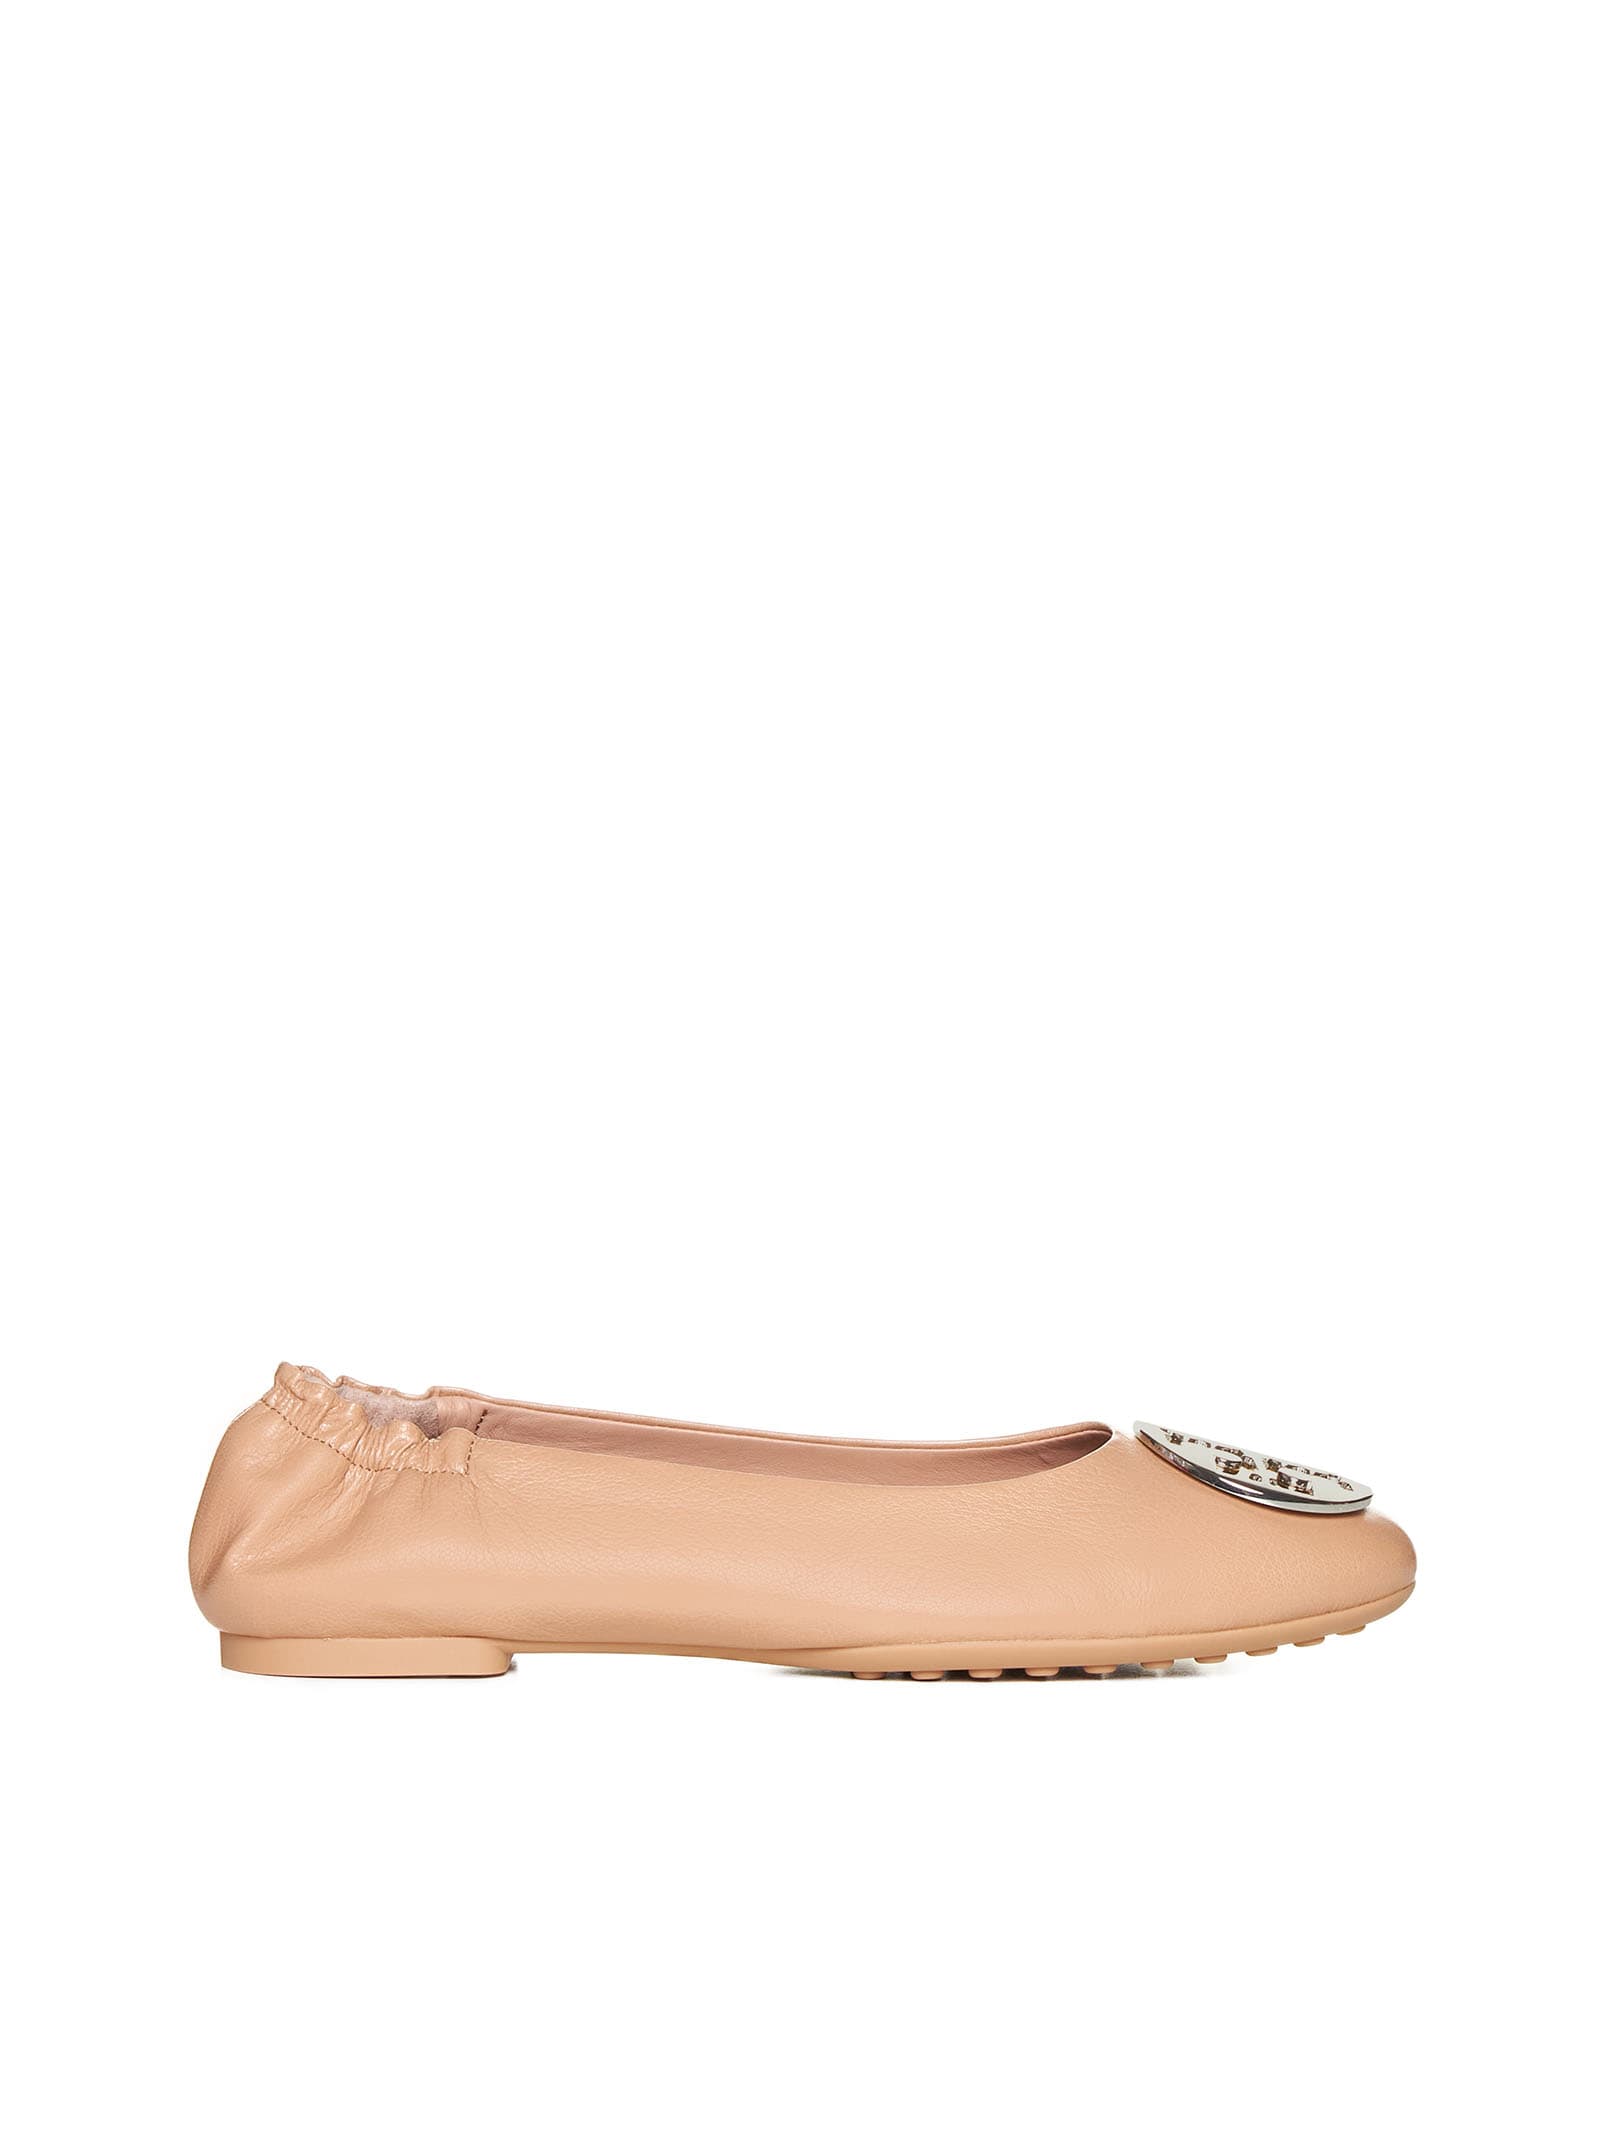 Tory Burch Flat Shoes In Neutral